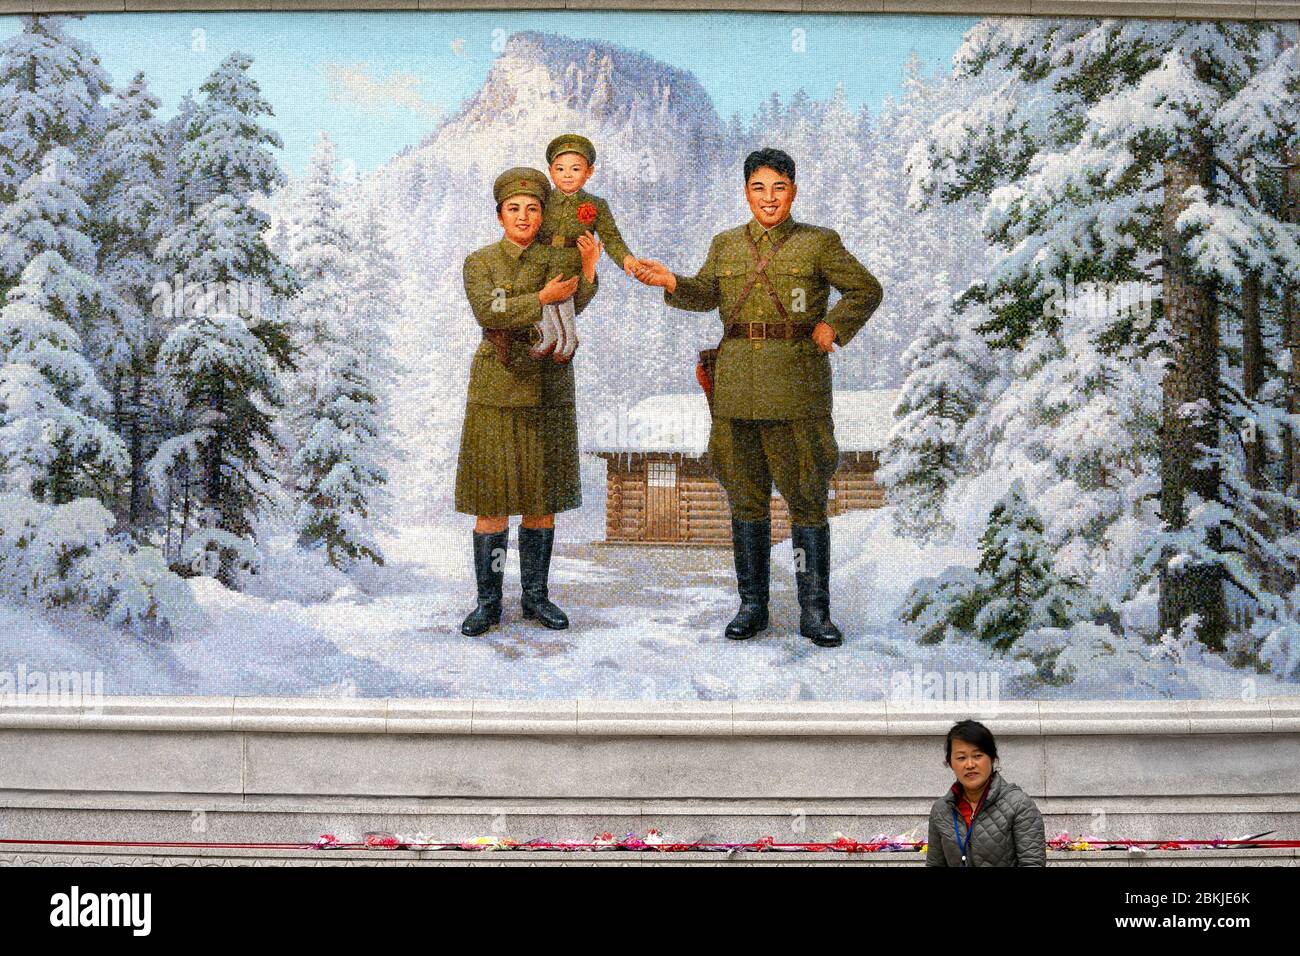 North Korea, Mount Paektu, the Korean Guerilla Secret Camp where General Kim Yong Il was born, mosaic of the former leade Kim Il Sung and his wife holding young General Kim Yong Il in her arms Stock Photo